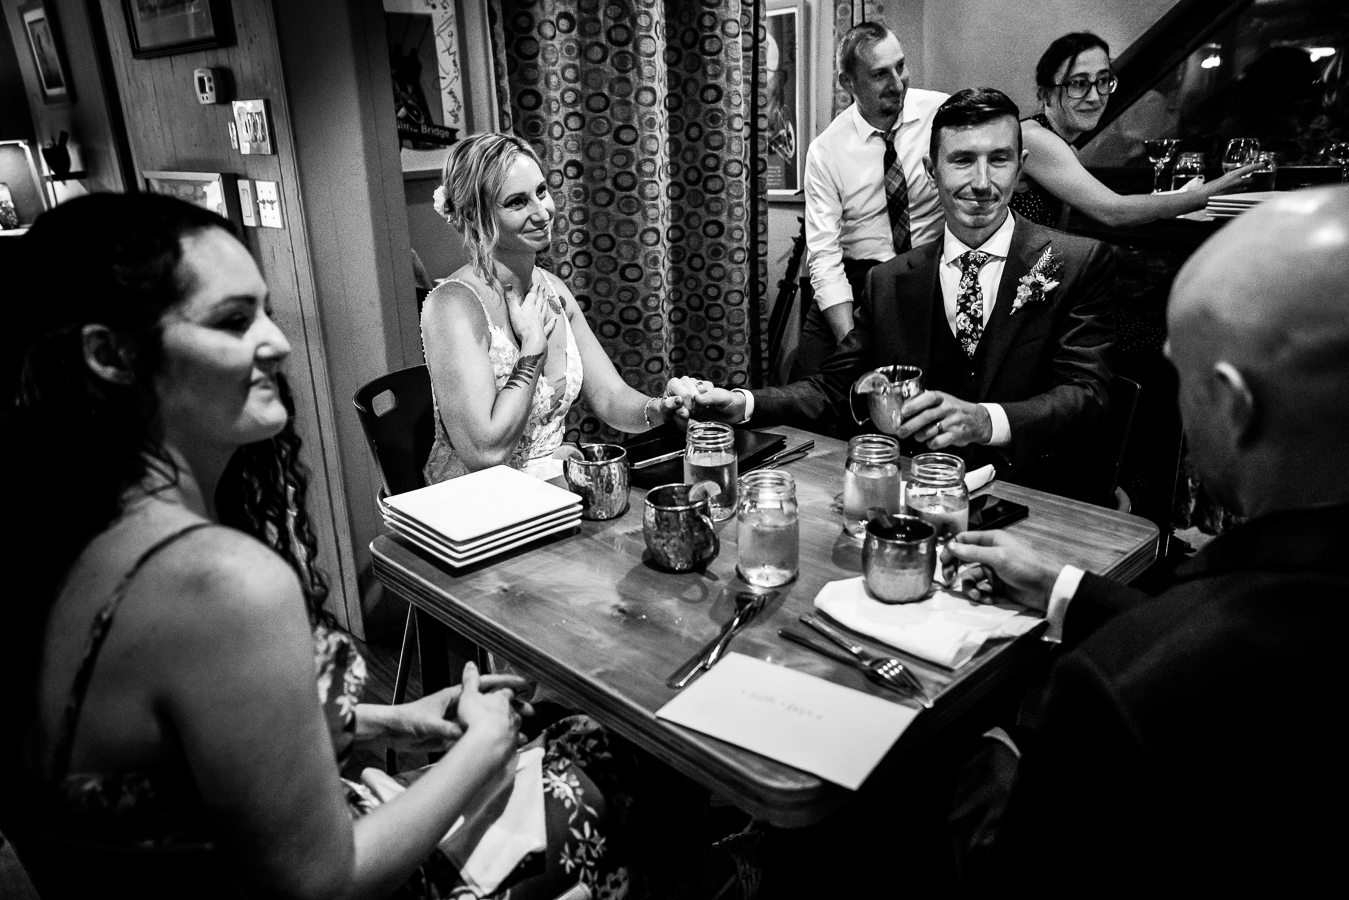 authentic wedding photographer, lisa rhinehart, captures this black and white image of the bride with her hand on her chest as she is touched by what her guests are saying during their speeches and toast at this cafe arielle wedding reception 